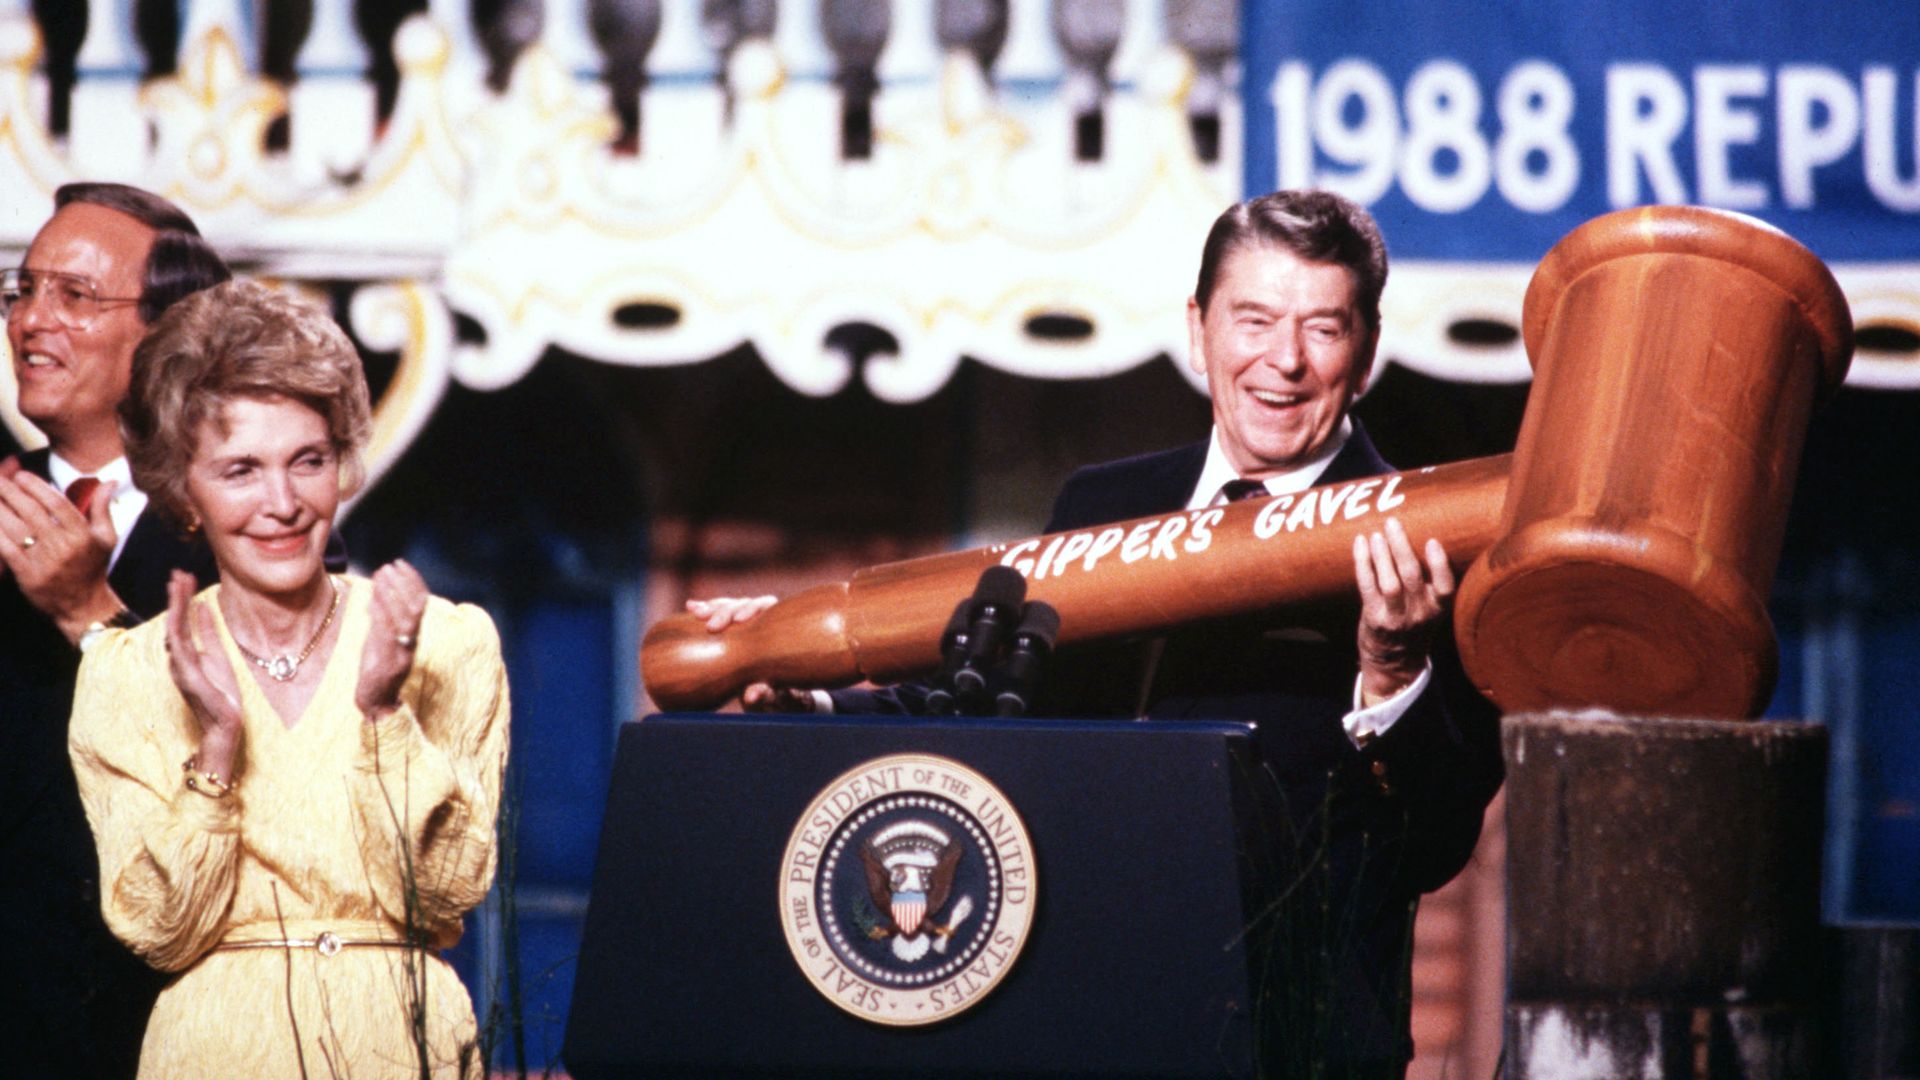 The photo shows President Ronald Reagan on stage in 1988 with a massive gavel.